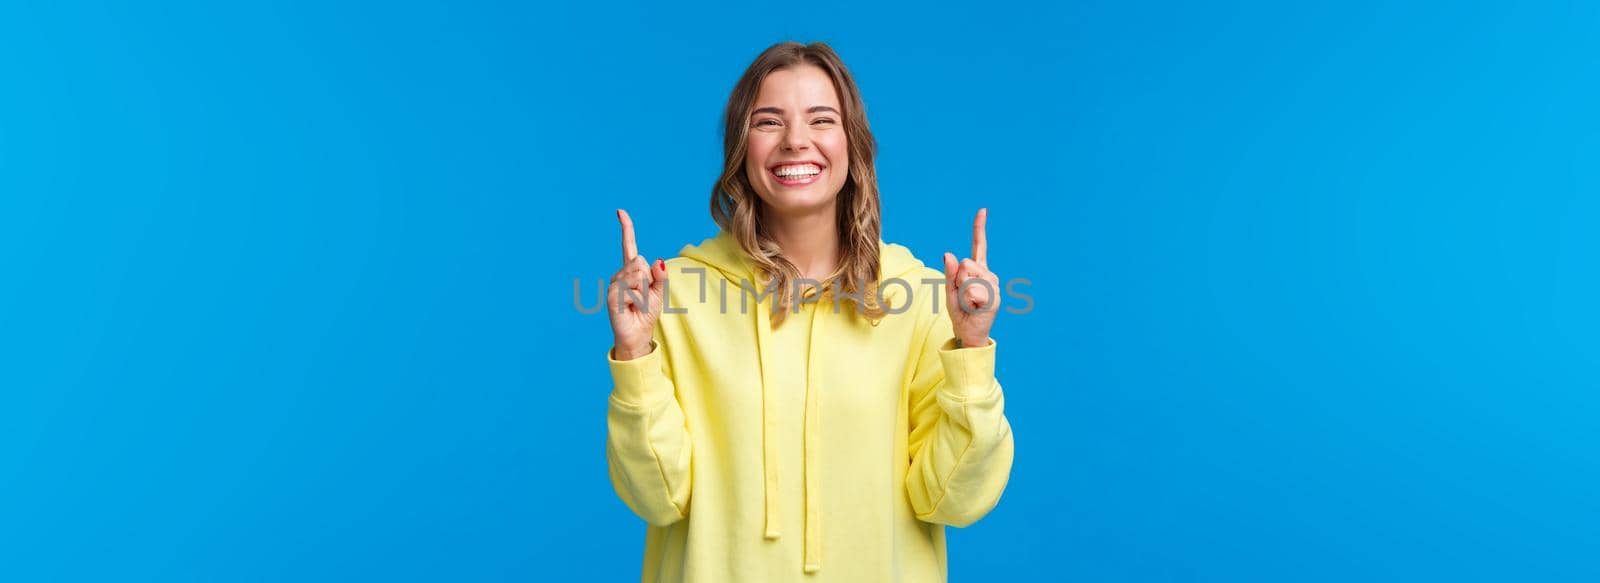 Cheerful happy smiling girl with blond hair in yellow hoodie, pointing fingers up and laughing carefree, recommend product, promo of subscribtion or company banner on blue background.